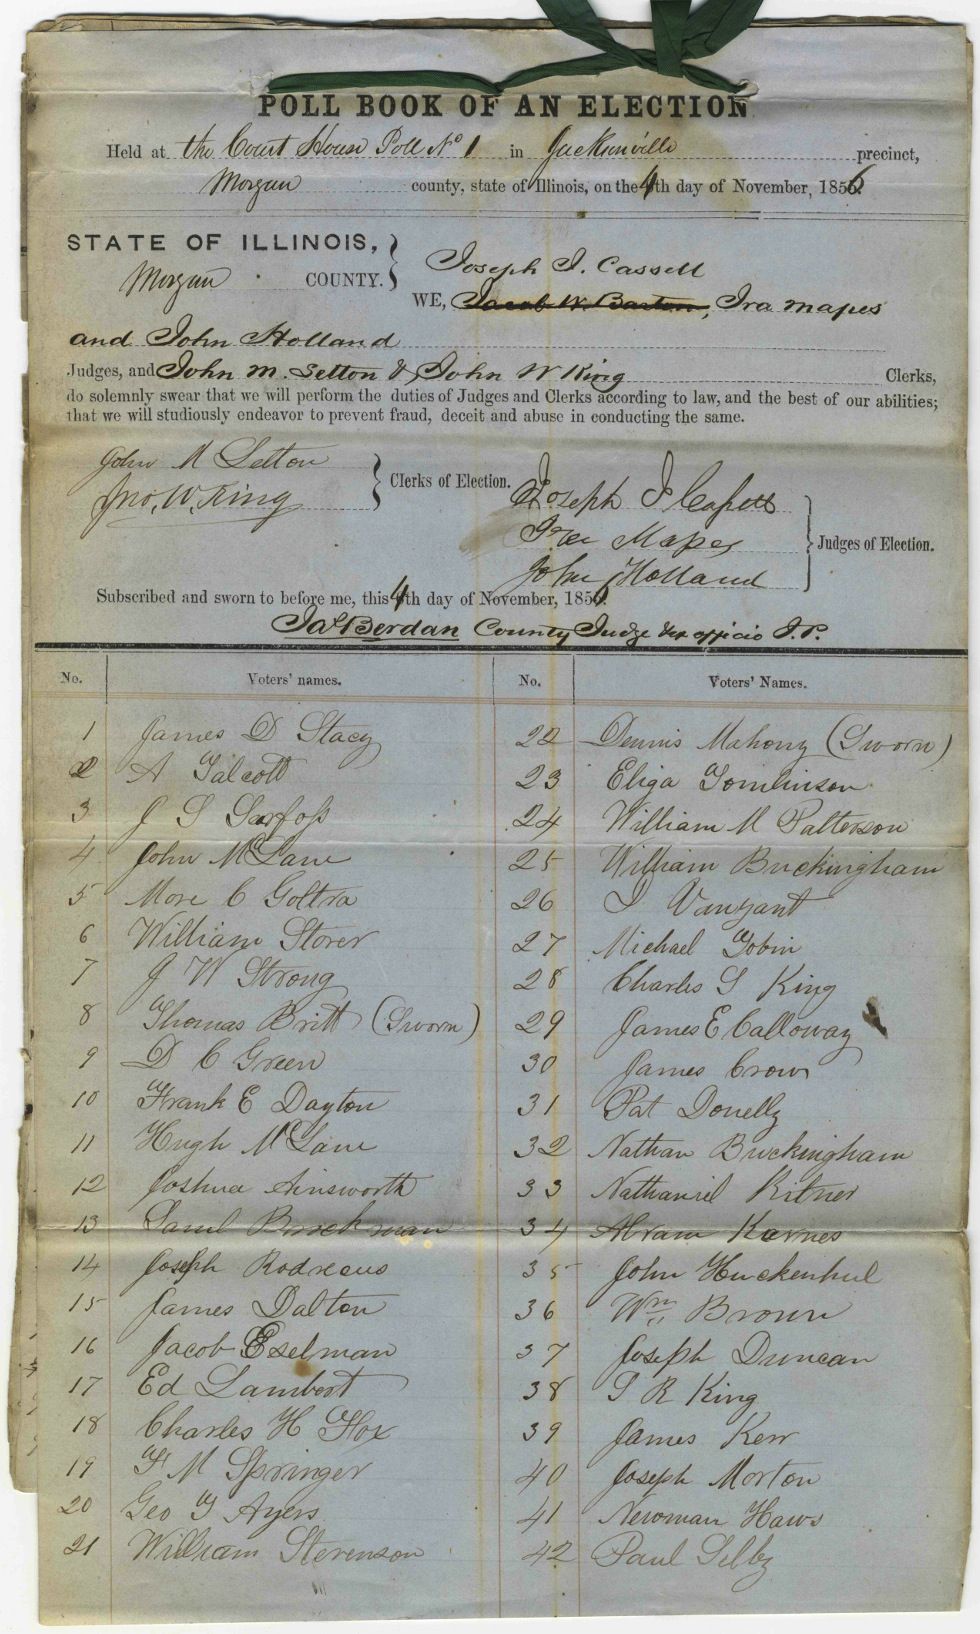 1856 Poll Book Certifying Abraham Jonas, Lincoln's Intimate Jewish Friend, an Elector